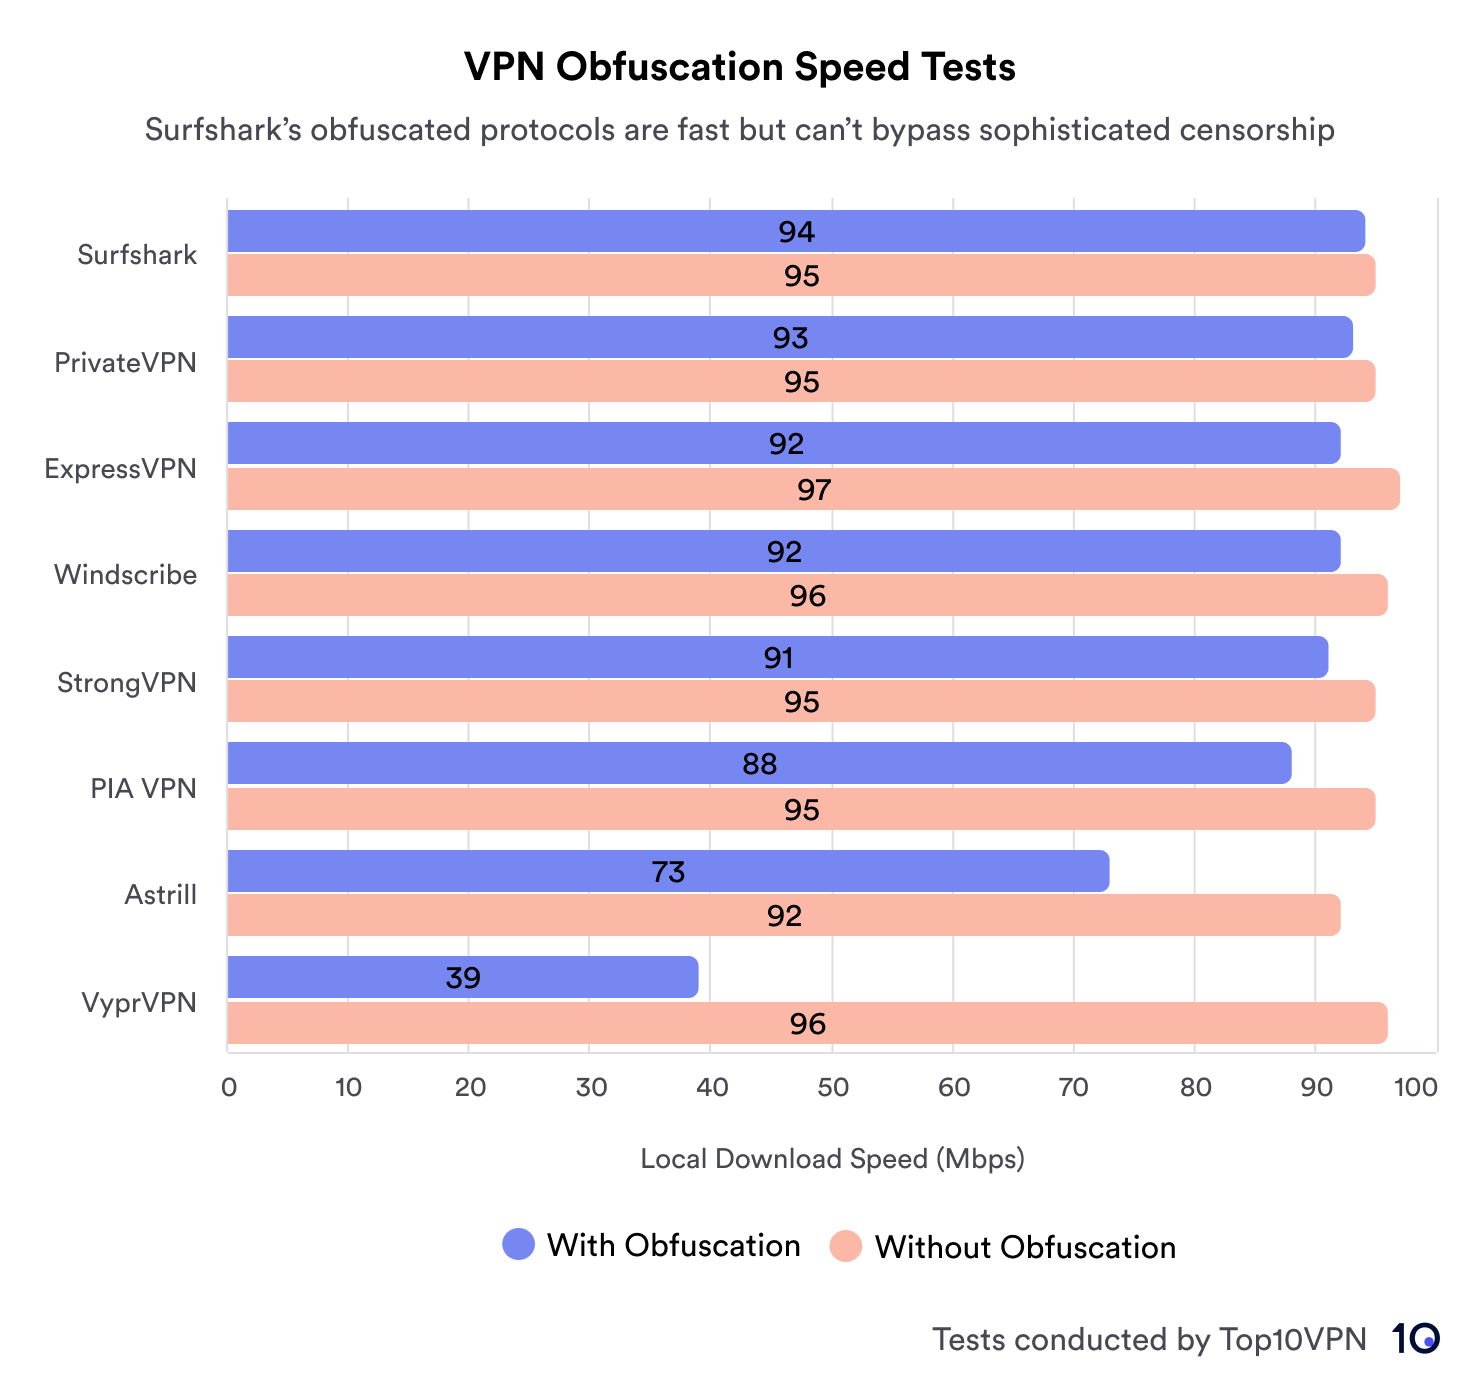 Bar graph comparing local download speeds of VPNs with and without obfuscation. Surfshark, PrivateVPN, ExpressVPN, Windscribe, StrongVPN, PIA VPN, Astrill, and VyprVPN are listed, showing higher speeds without obfuscation. The lowest with obfuscation is VyprVPN at 39 Mbps; the highest with is ExpressVPN at 97 Mbps.